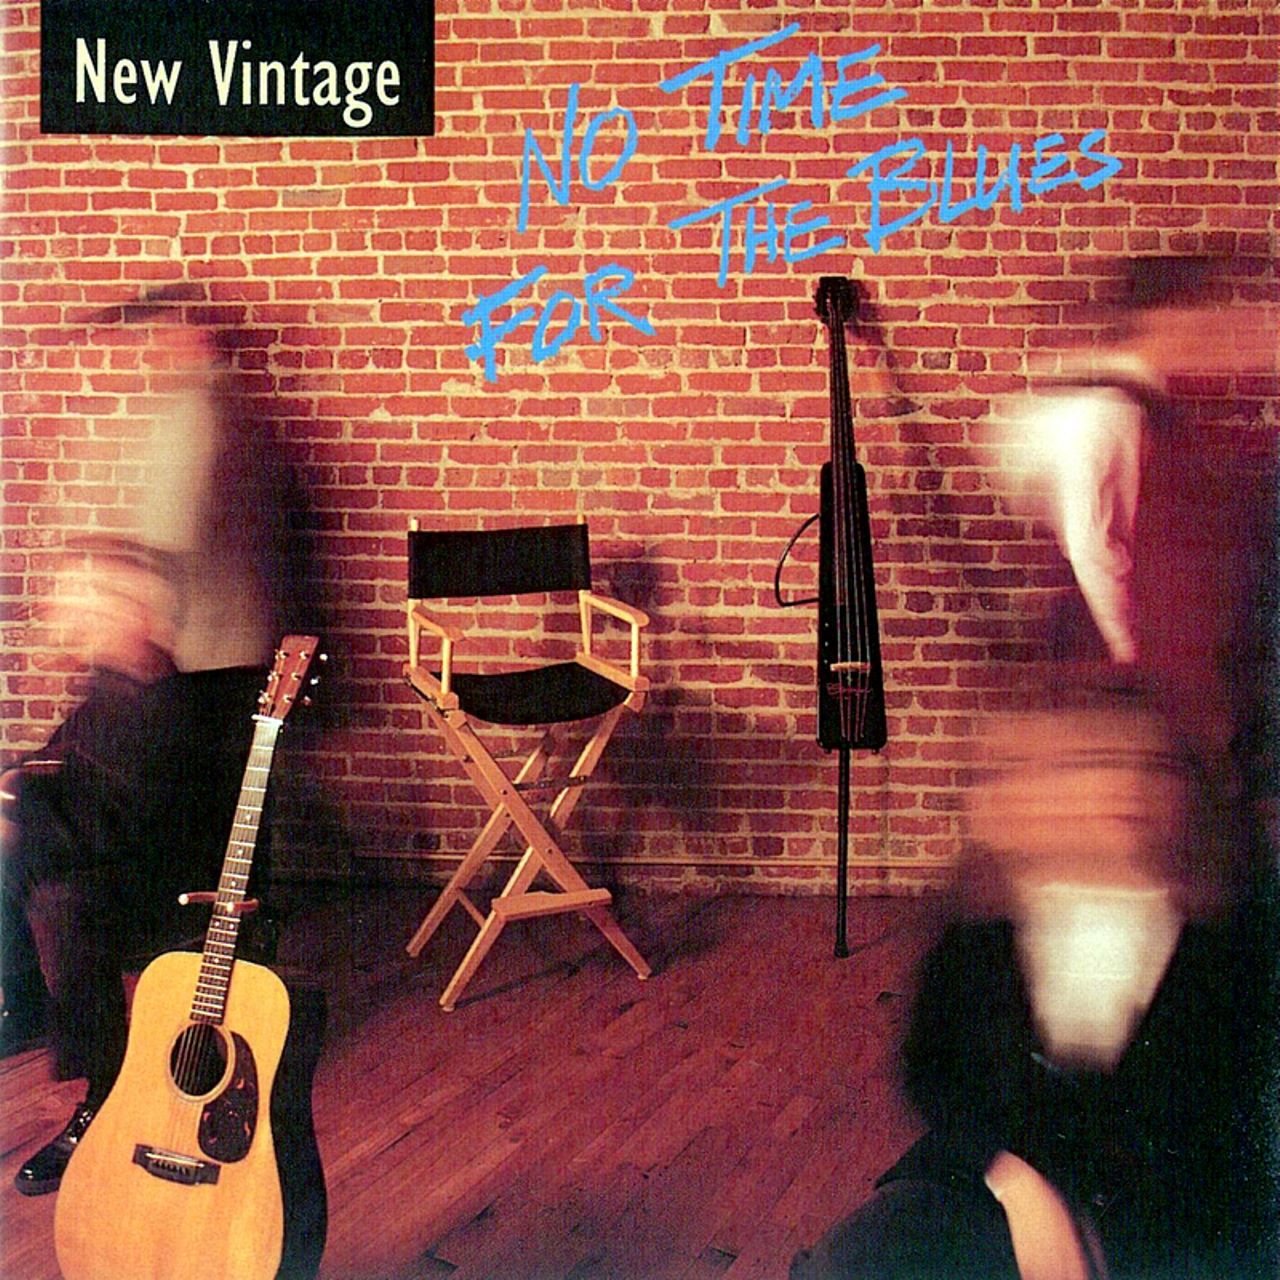 New Vintage - No Time For The Blues cover album